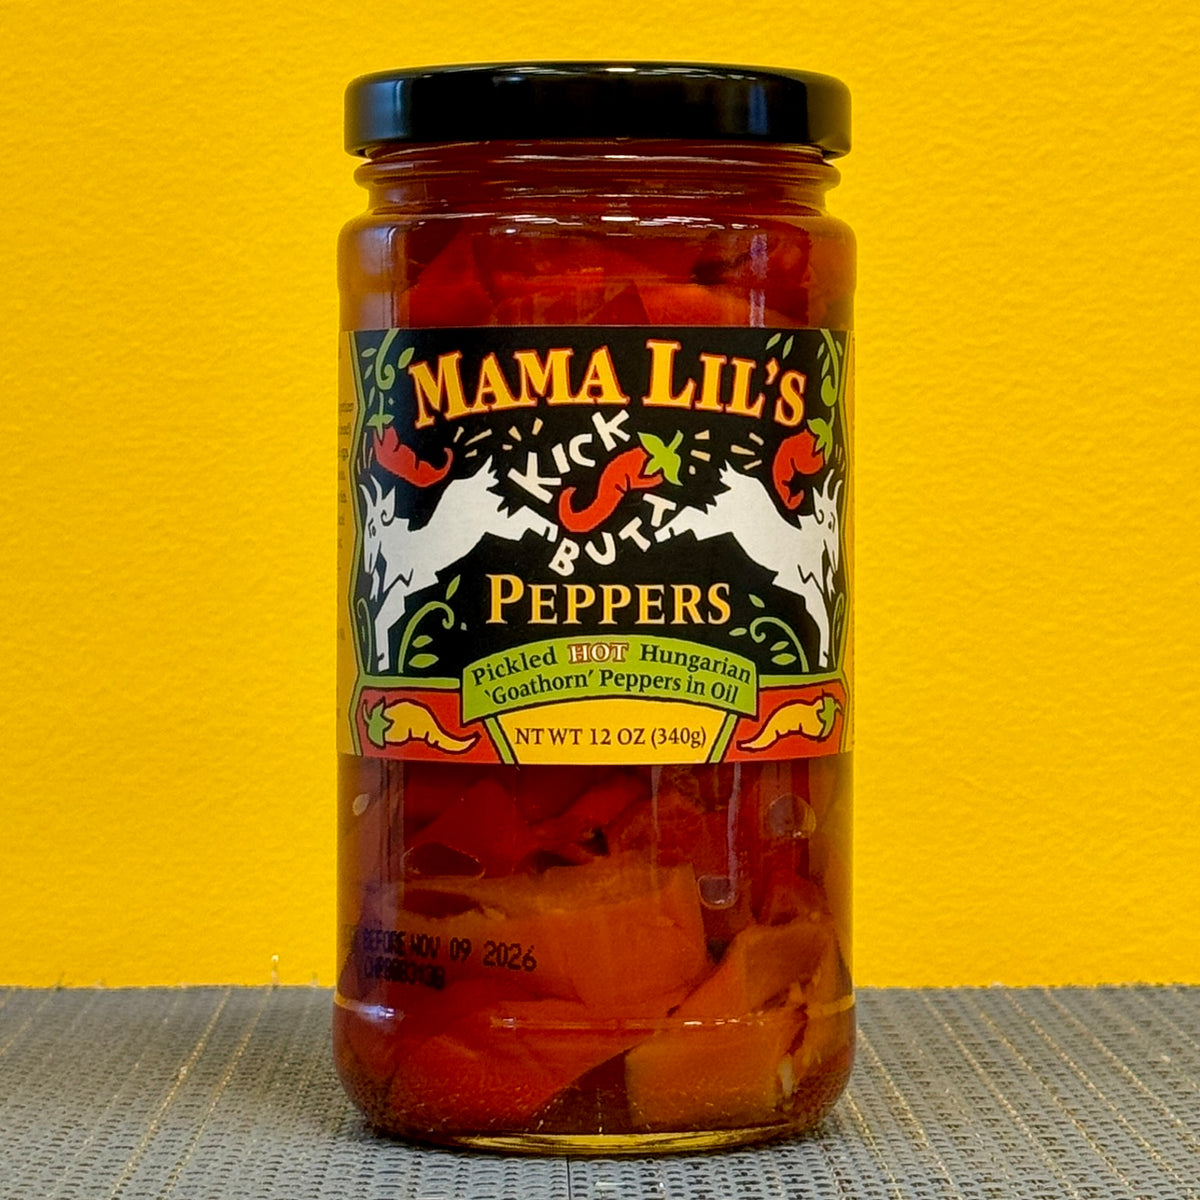 Mama Lil's Kick Butt Peppers